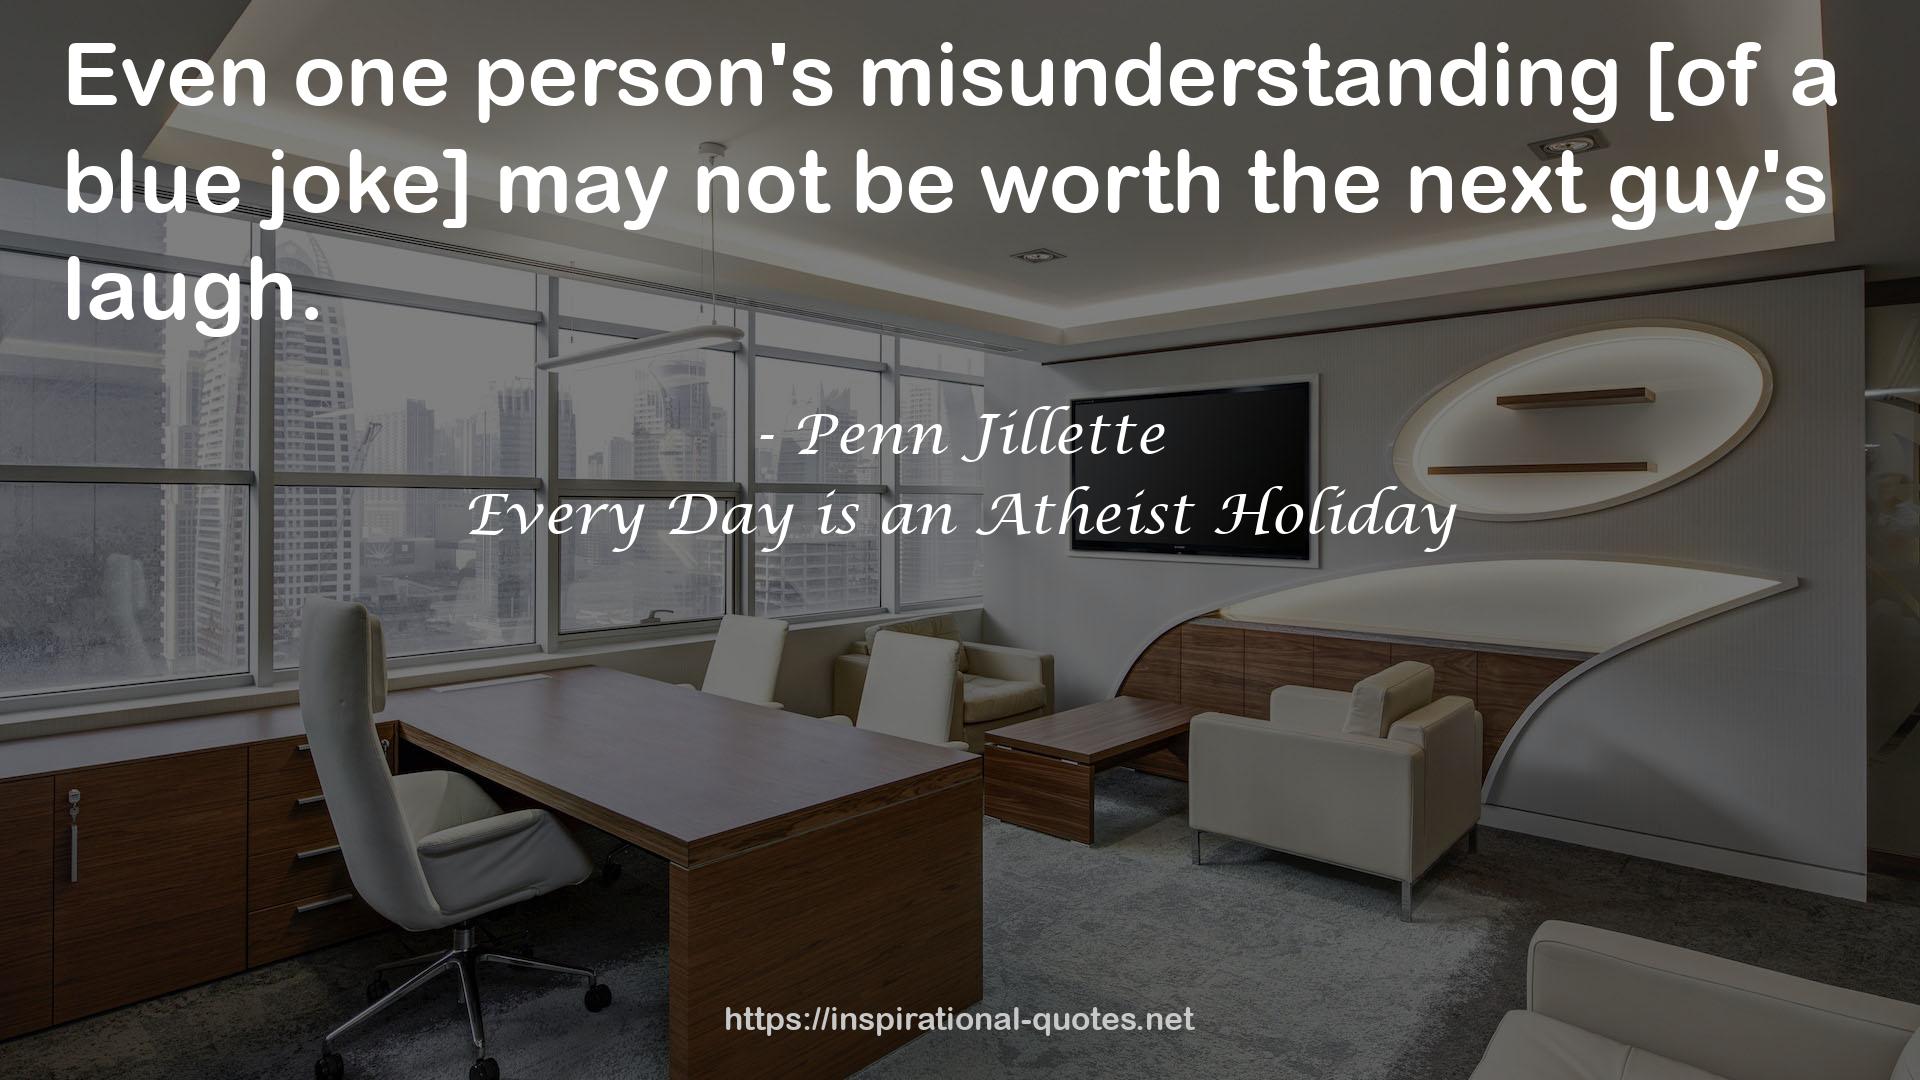 Every Day is an Atheist Holiday QUOTES